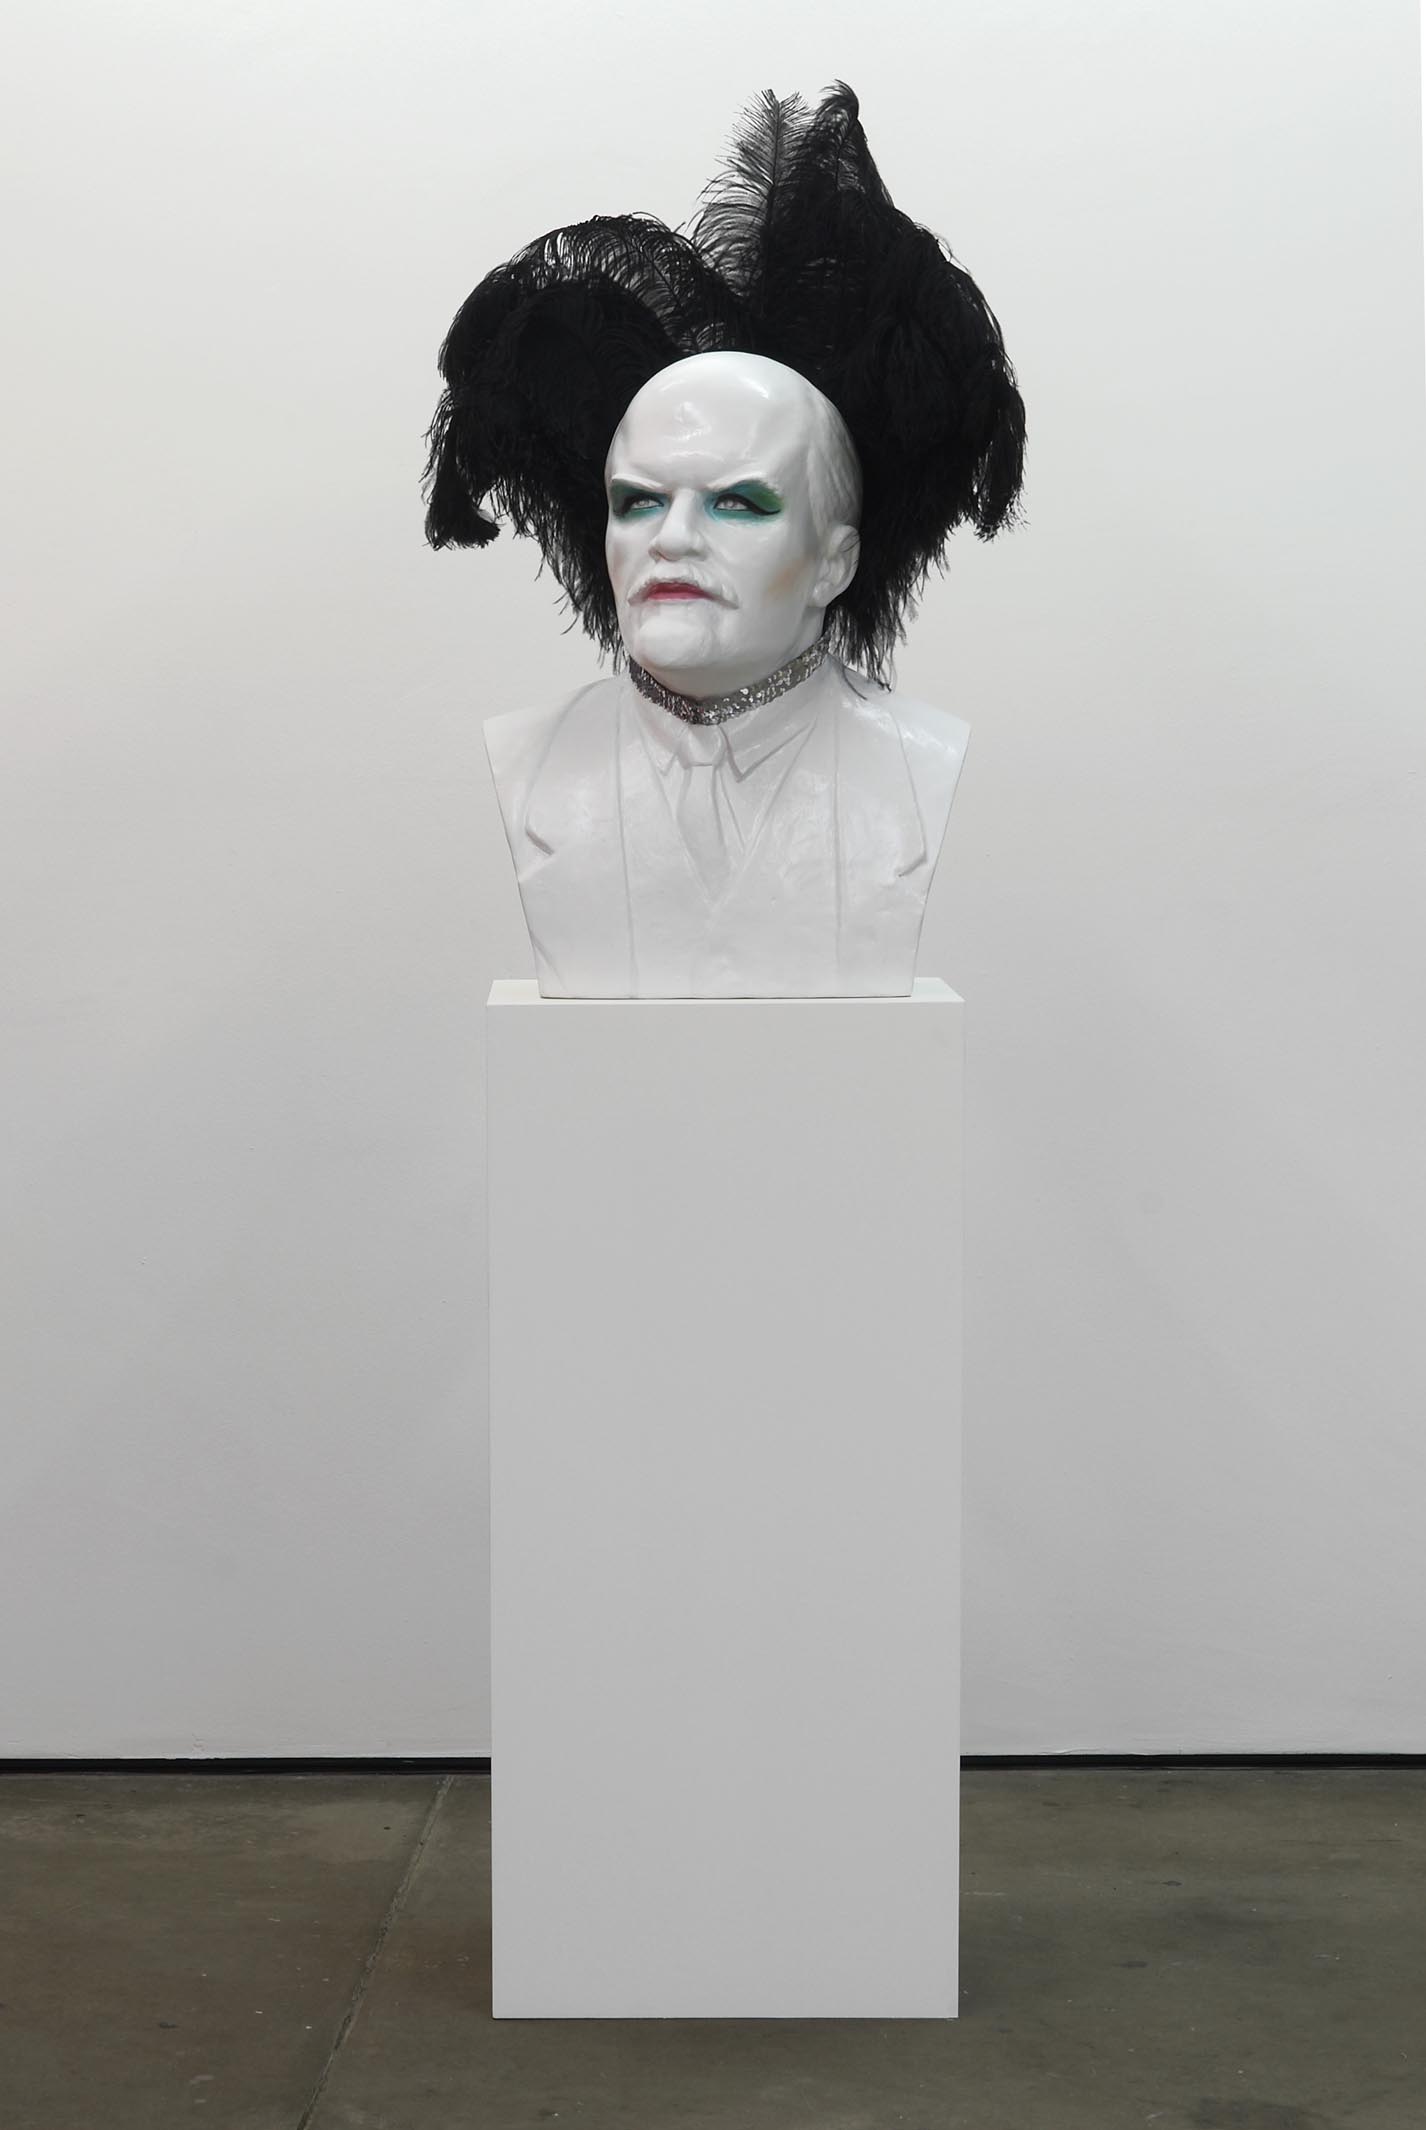     Diana (At the Frontier) 2008 ostrich feathers, sequin collar, ceramic bust and plinth 100 x 64 x 48cm    